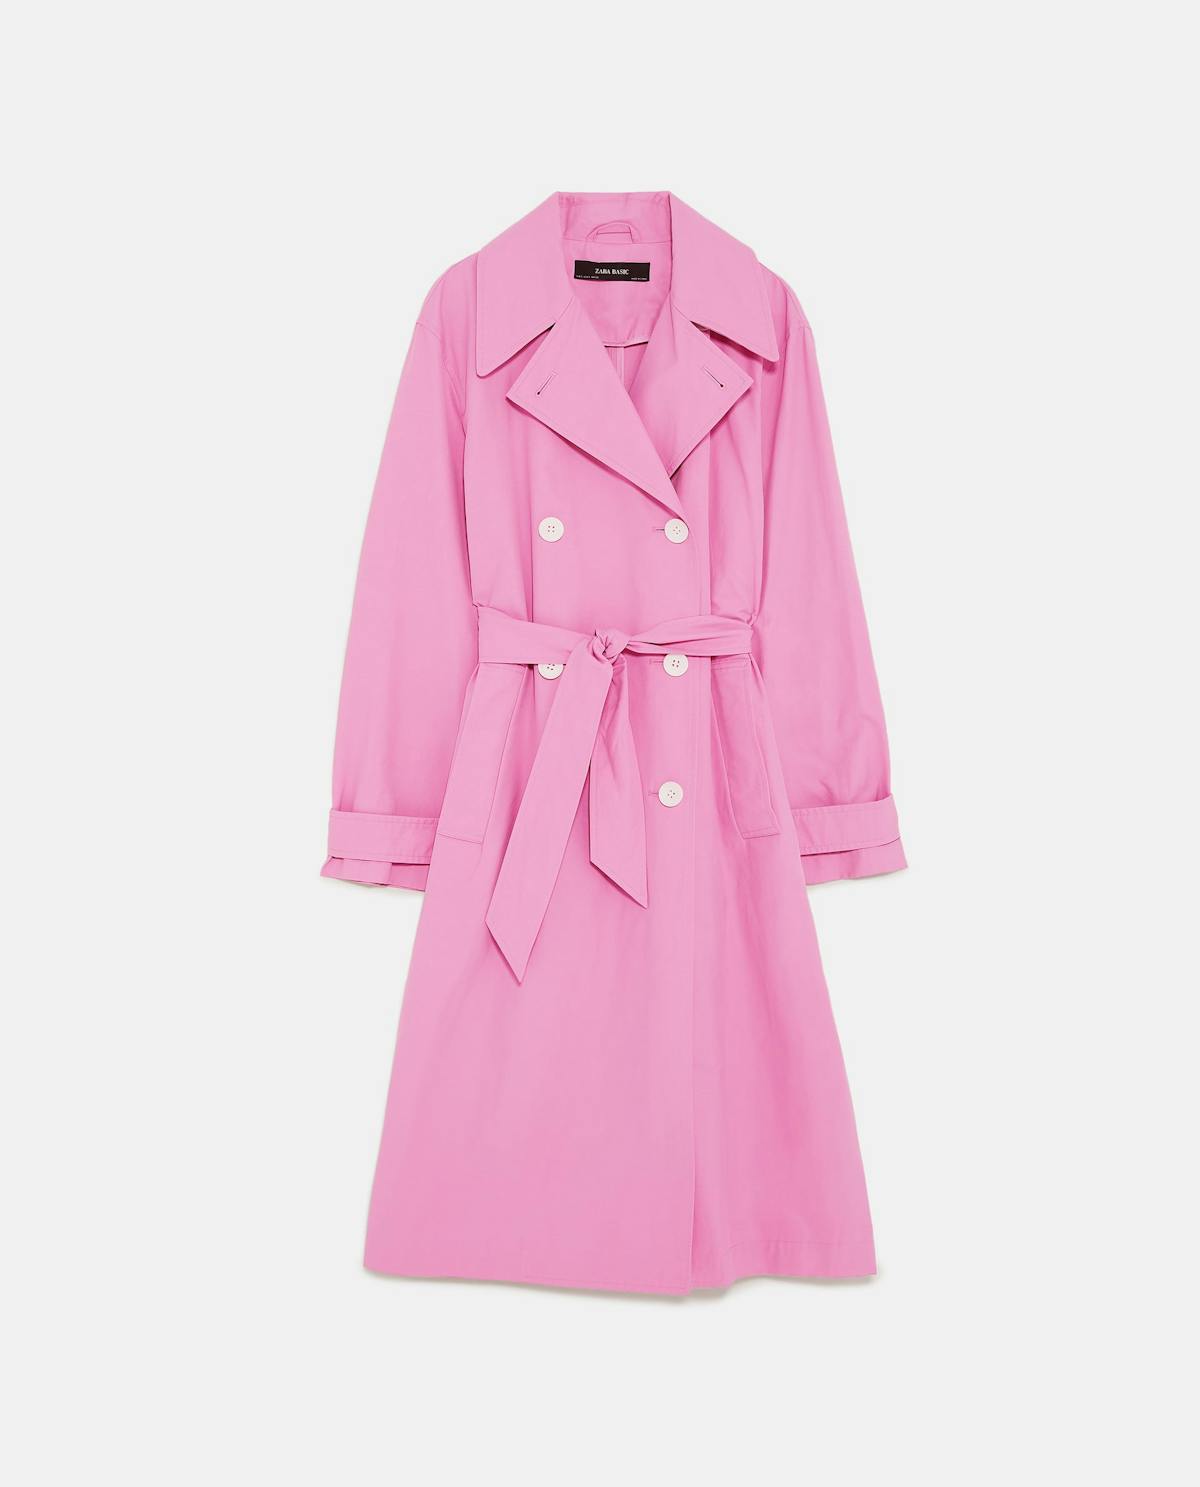 Women's Trench Coats | The 6 Best Trench Coats